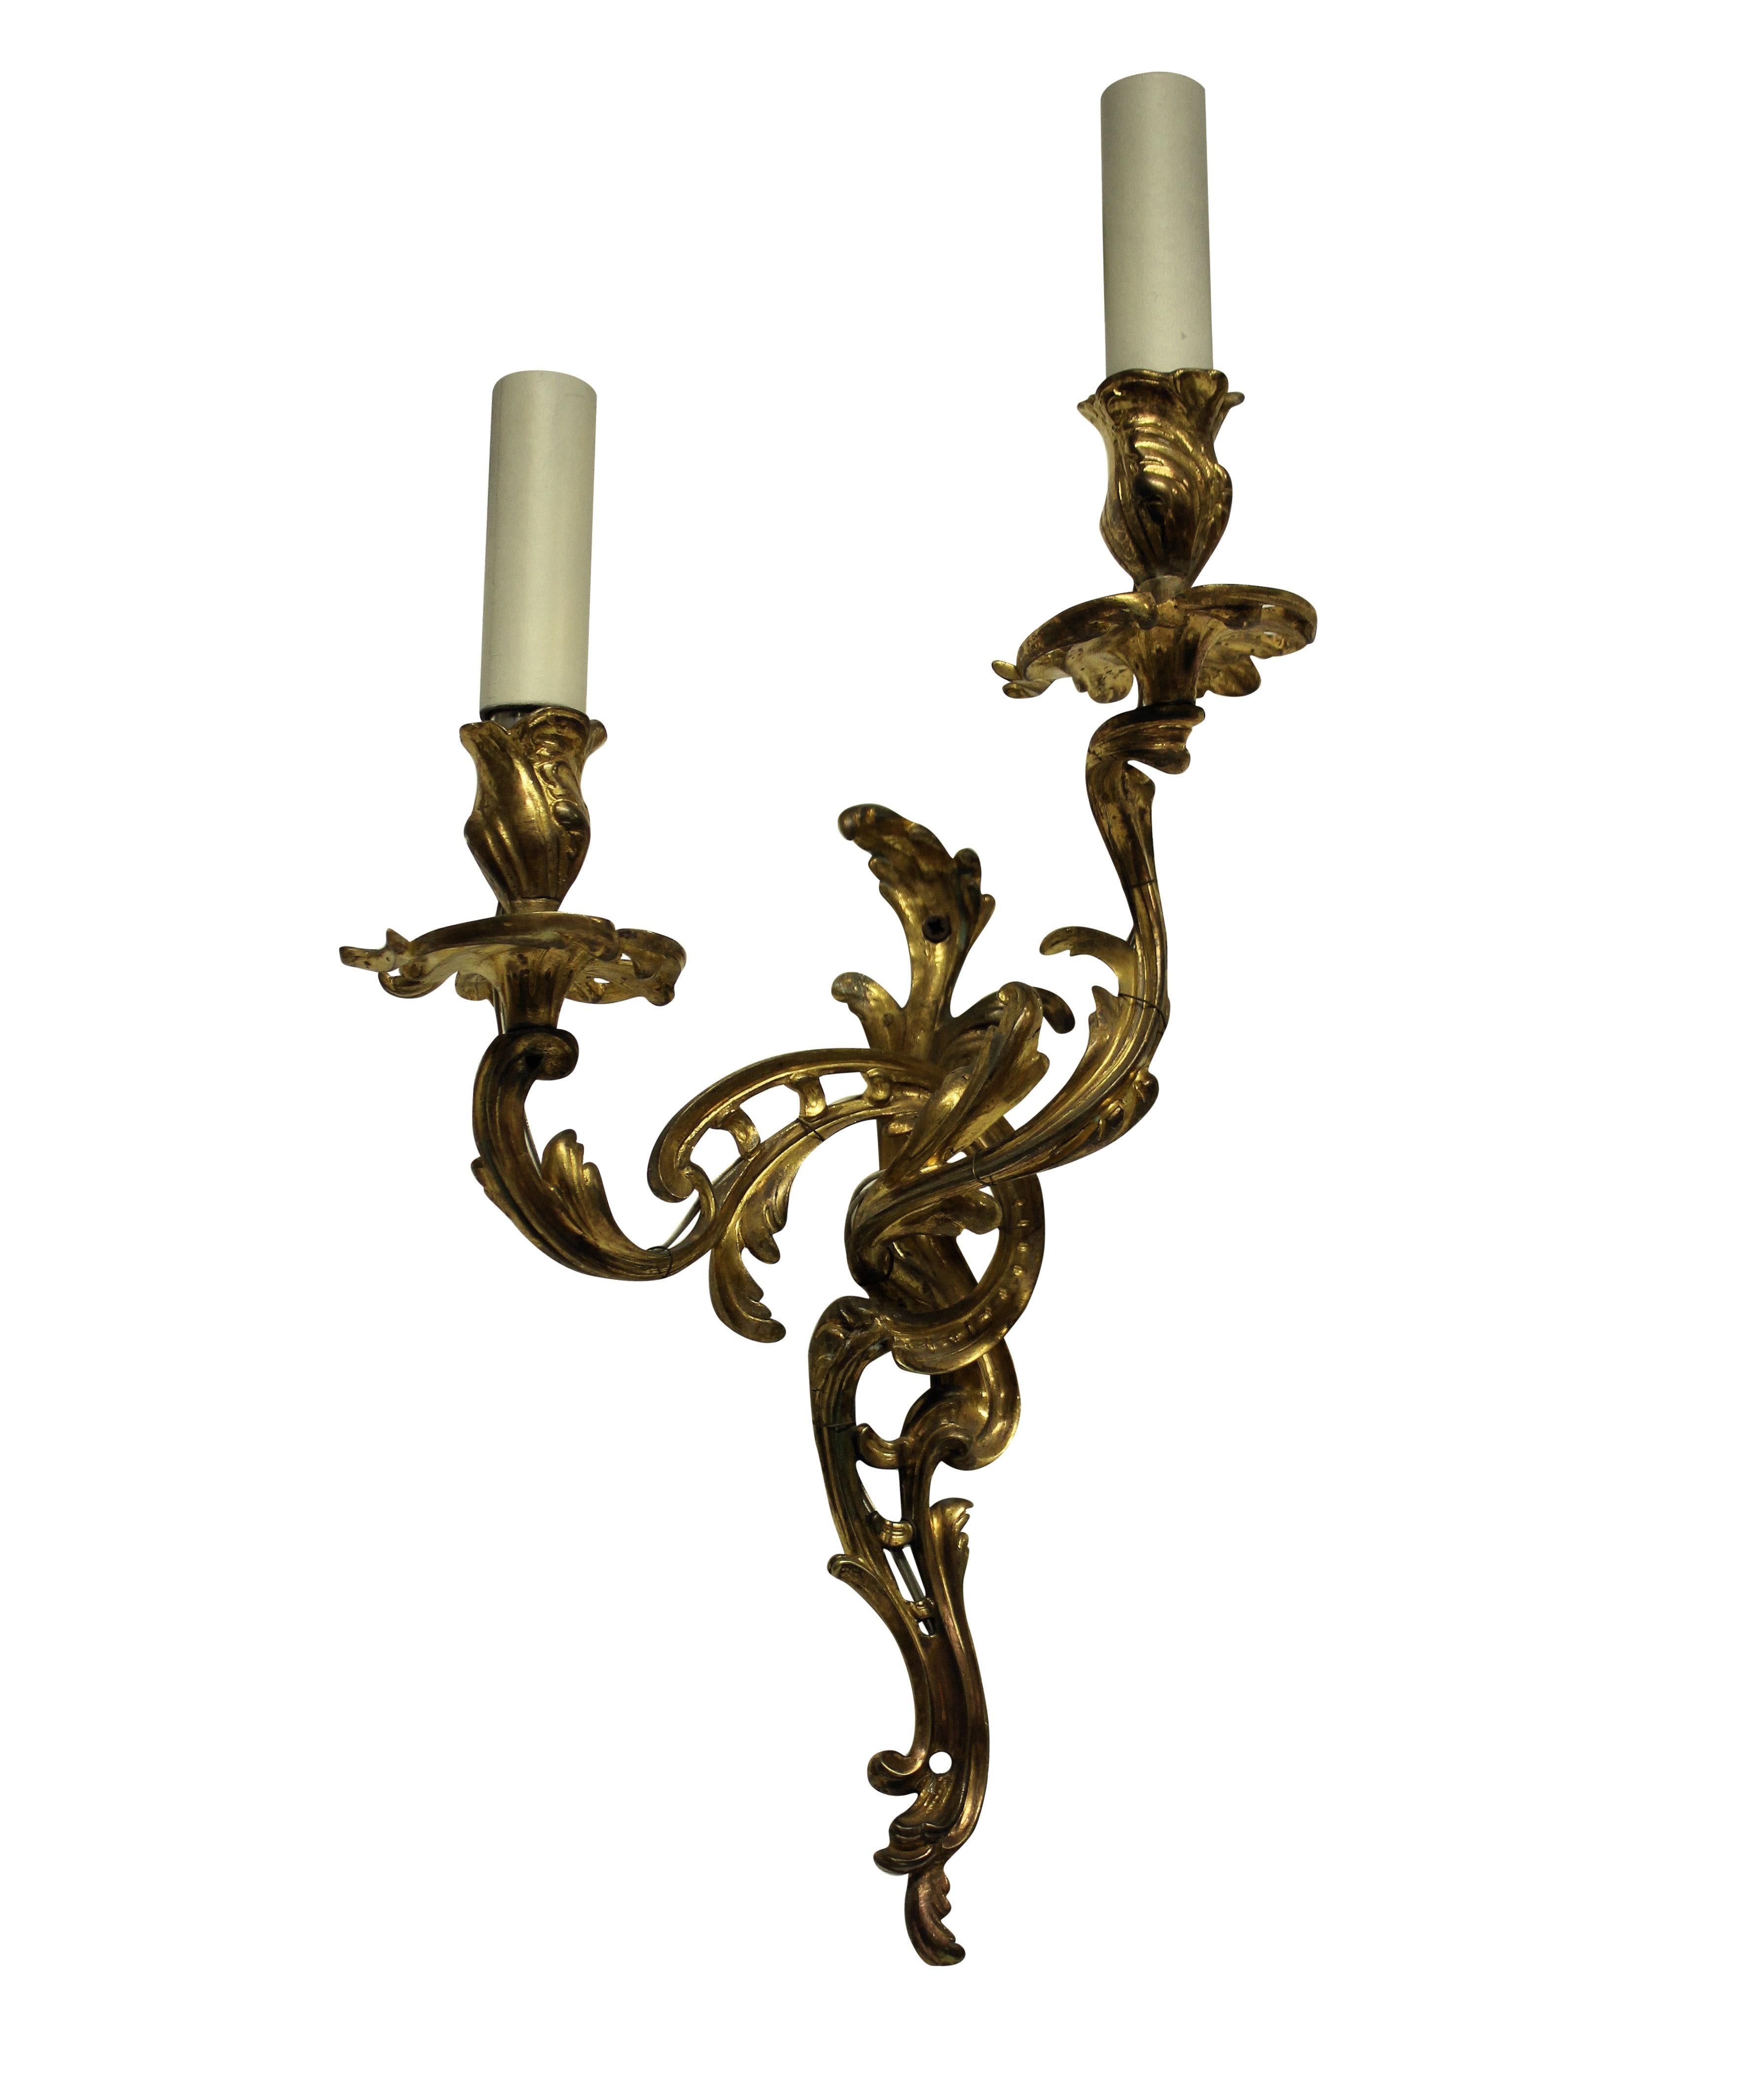 Gilt Pair of Louis XV Style Wall Sconces